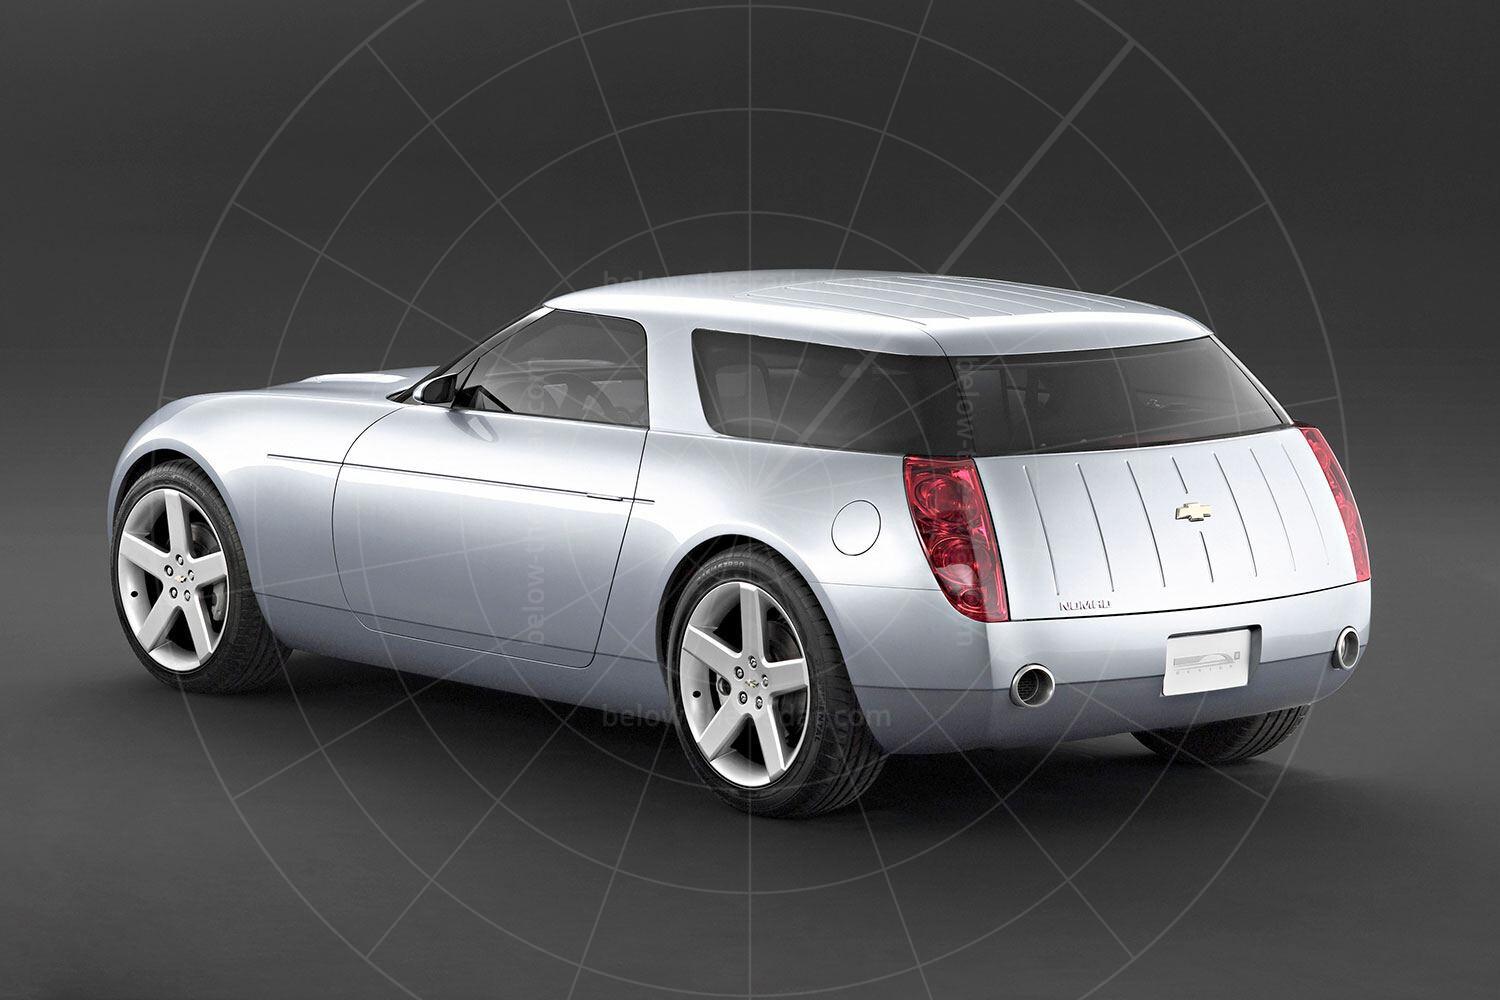 The 2004 Chevrolet Nomad concept Pic: GM | The 2004 Chevrolet Nomad concept